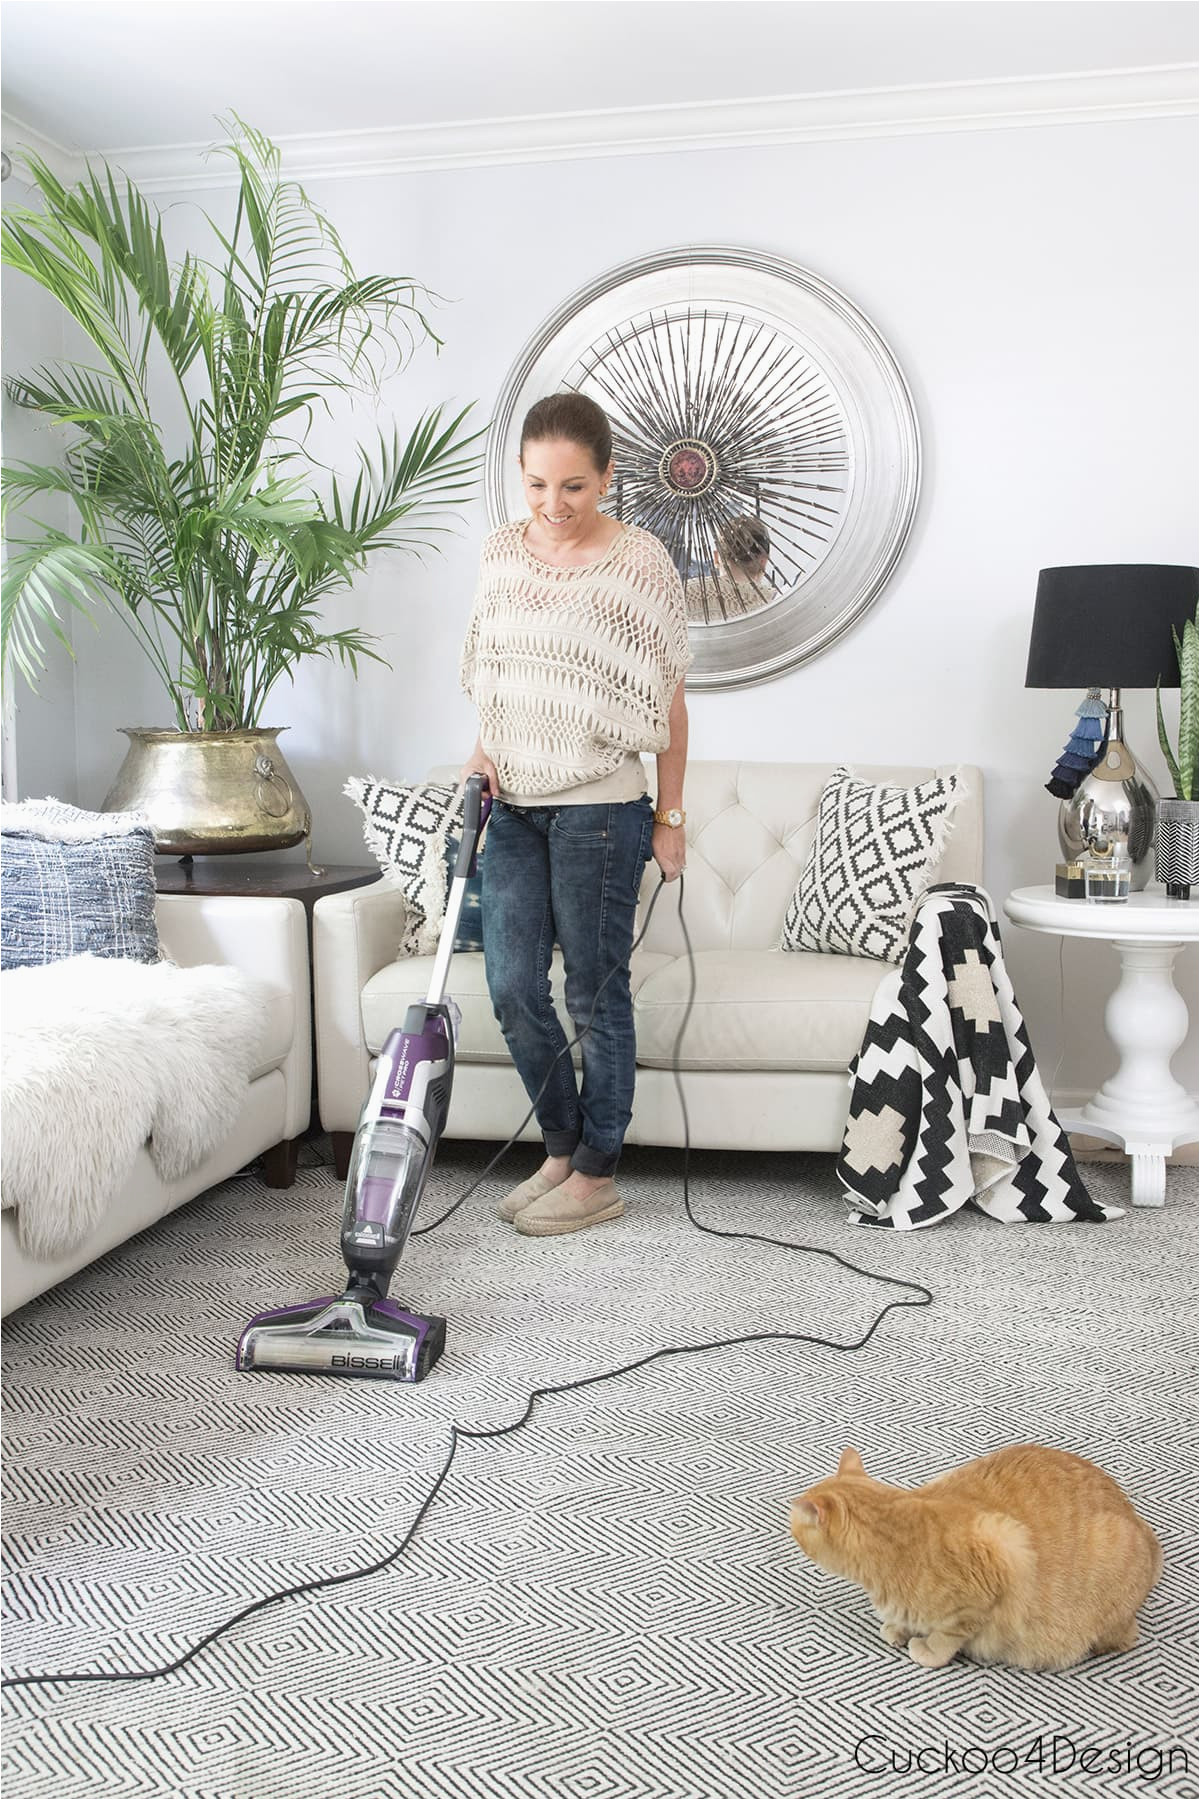 Bissell Crosswave On area Rugs My Bissell Crosswave Pet Pro Review – Cuckoo4design